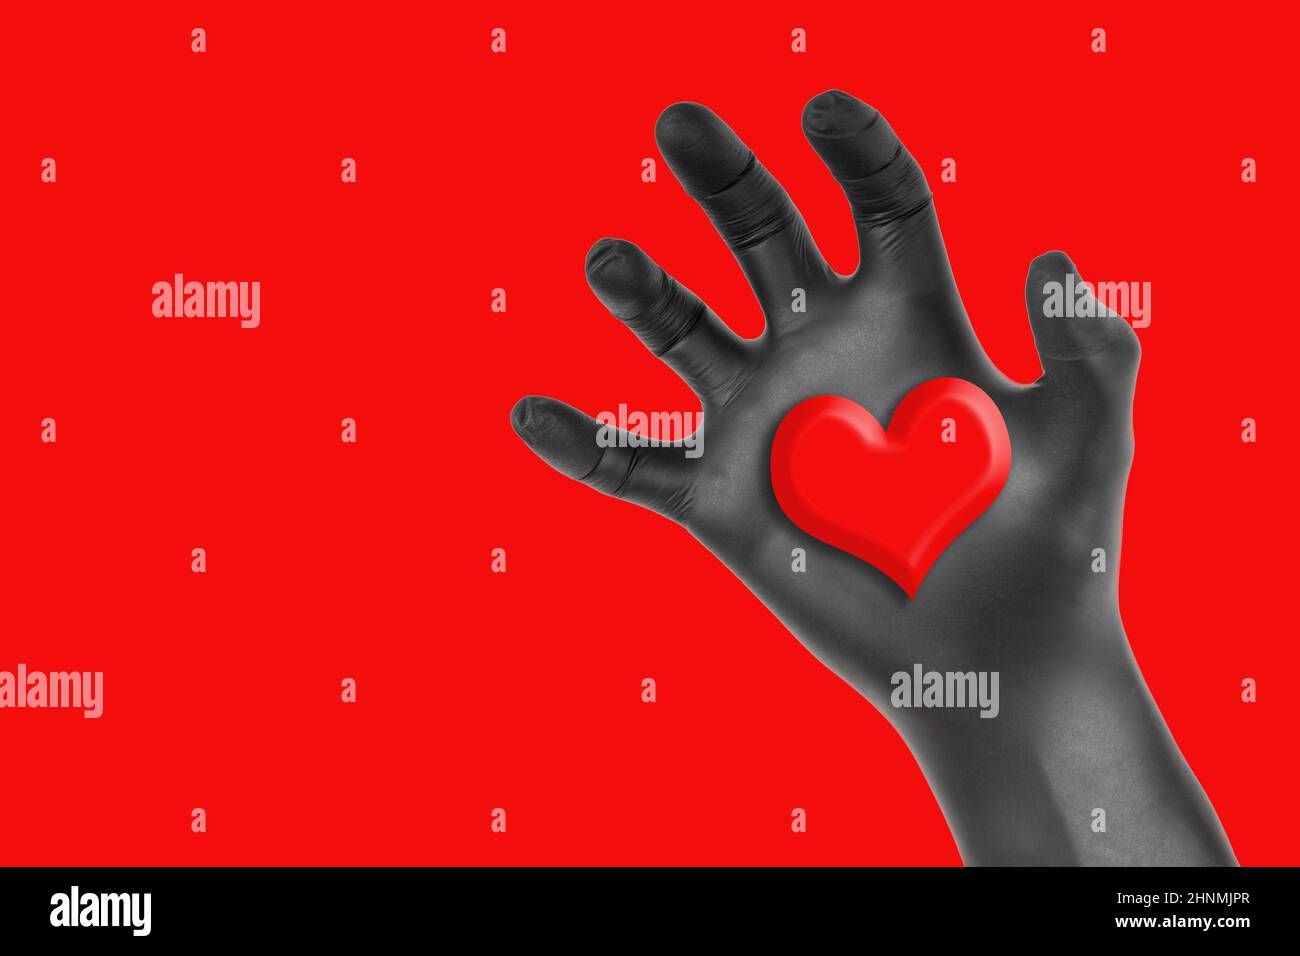 Black gloved hand grabbing a heart isolated on a red background. Romantic heart stealing concept. Stock Photo